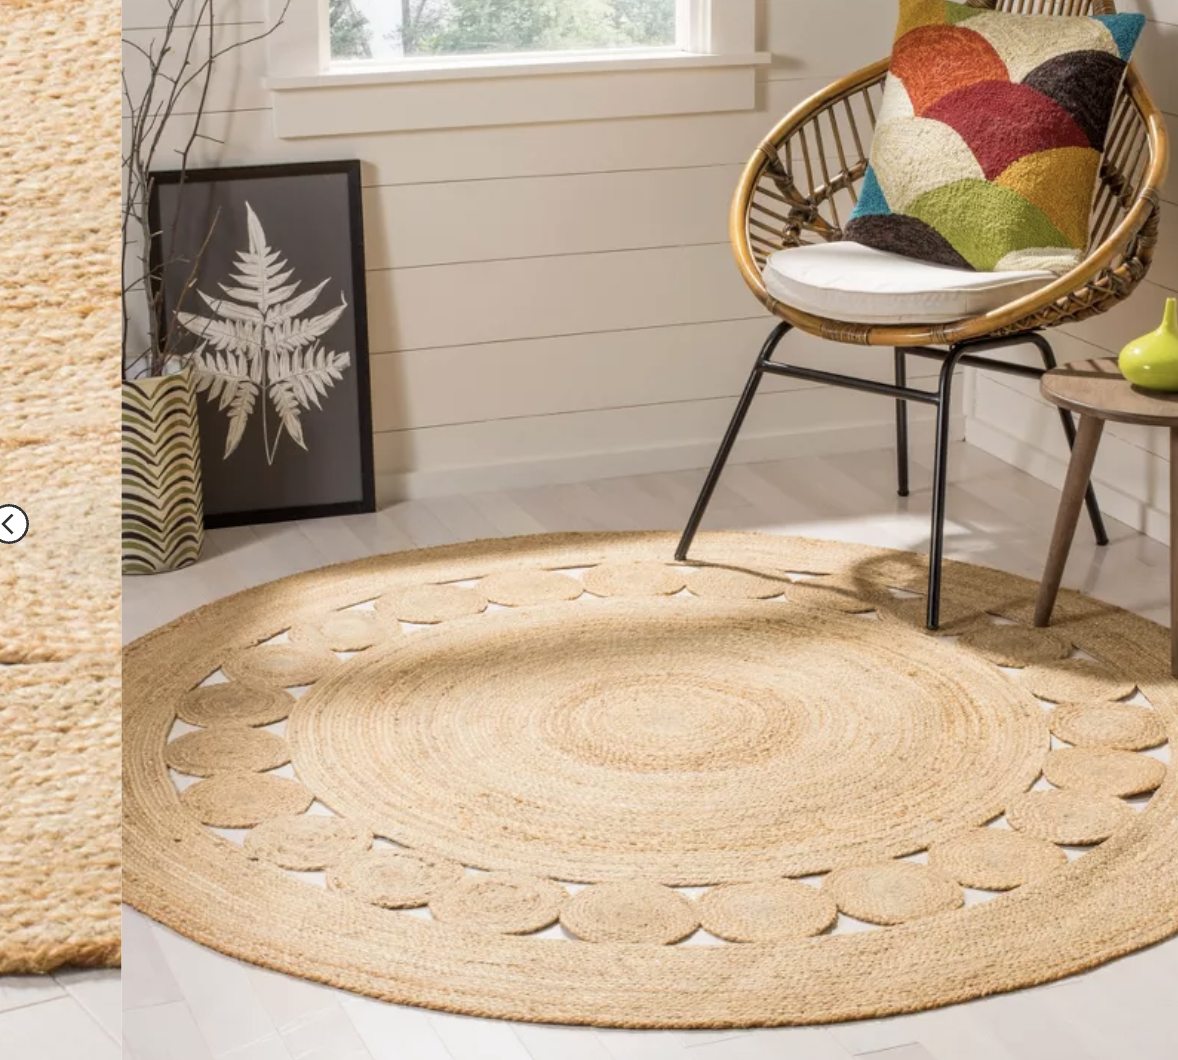 The solid woven round rug with intricate detailing